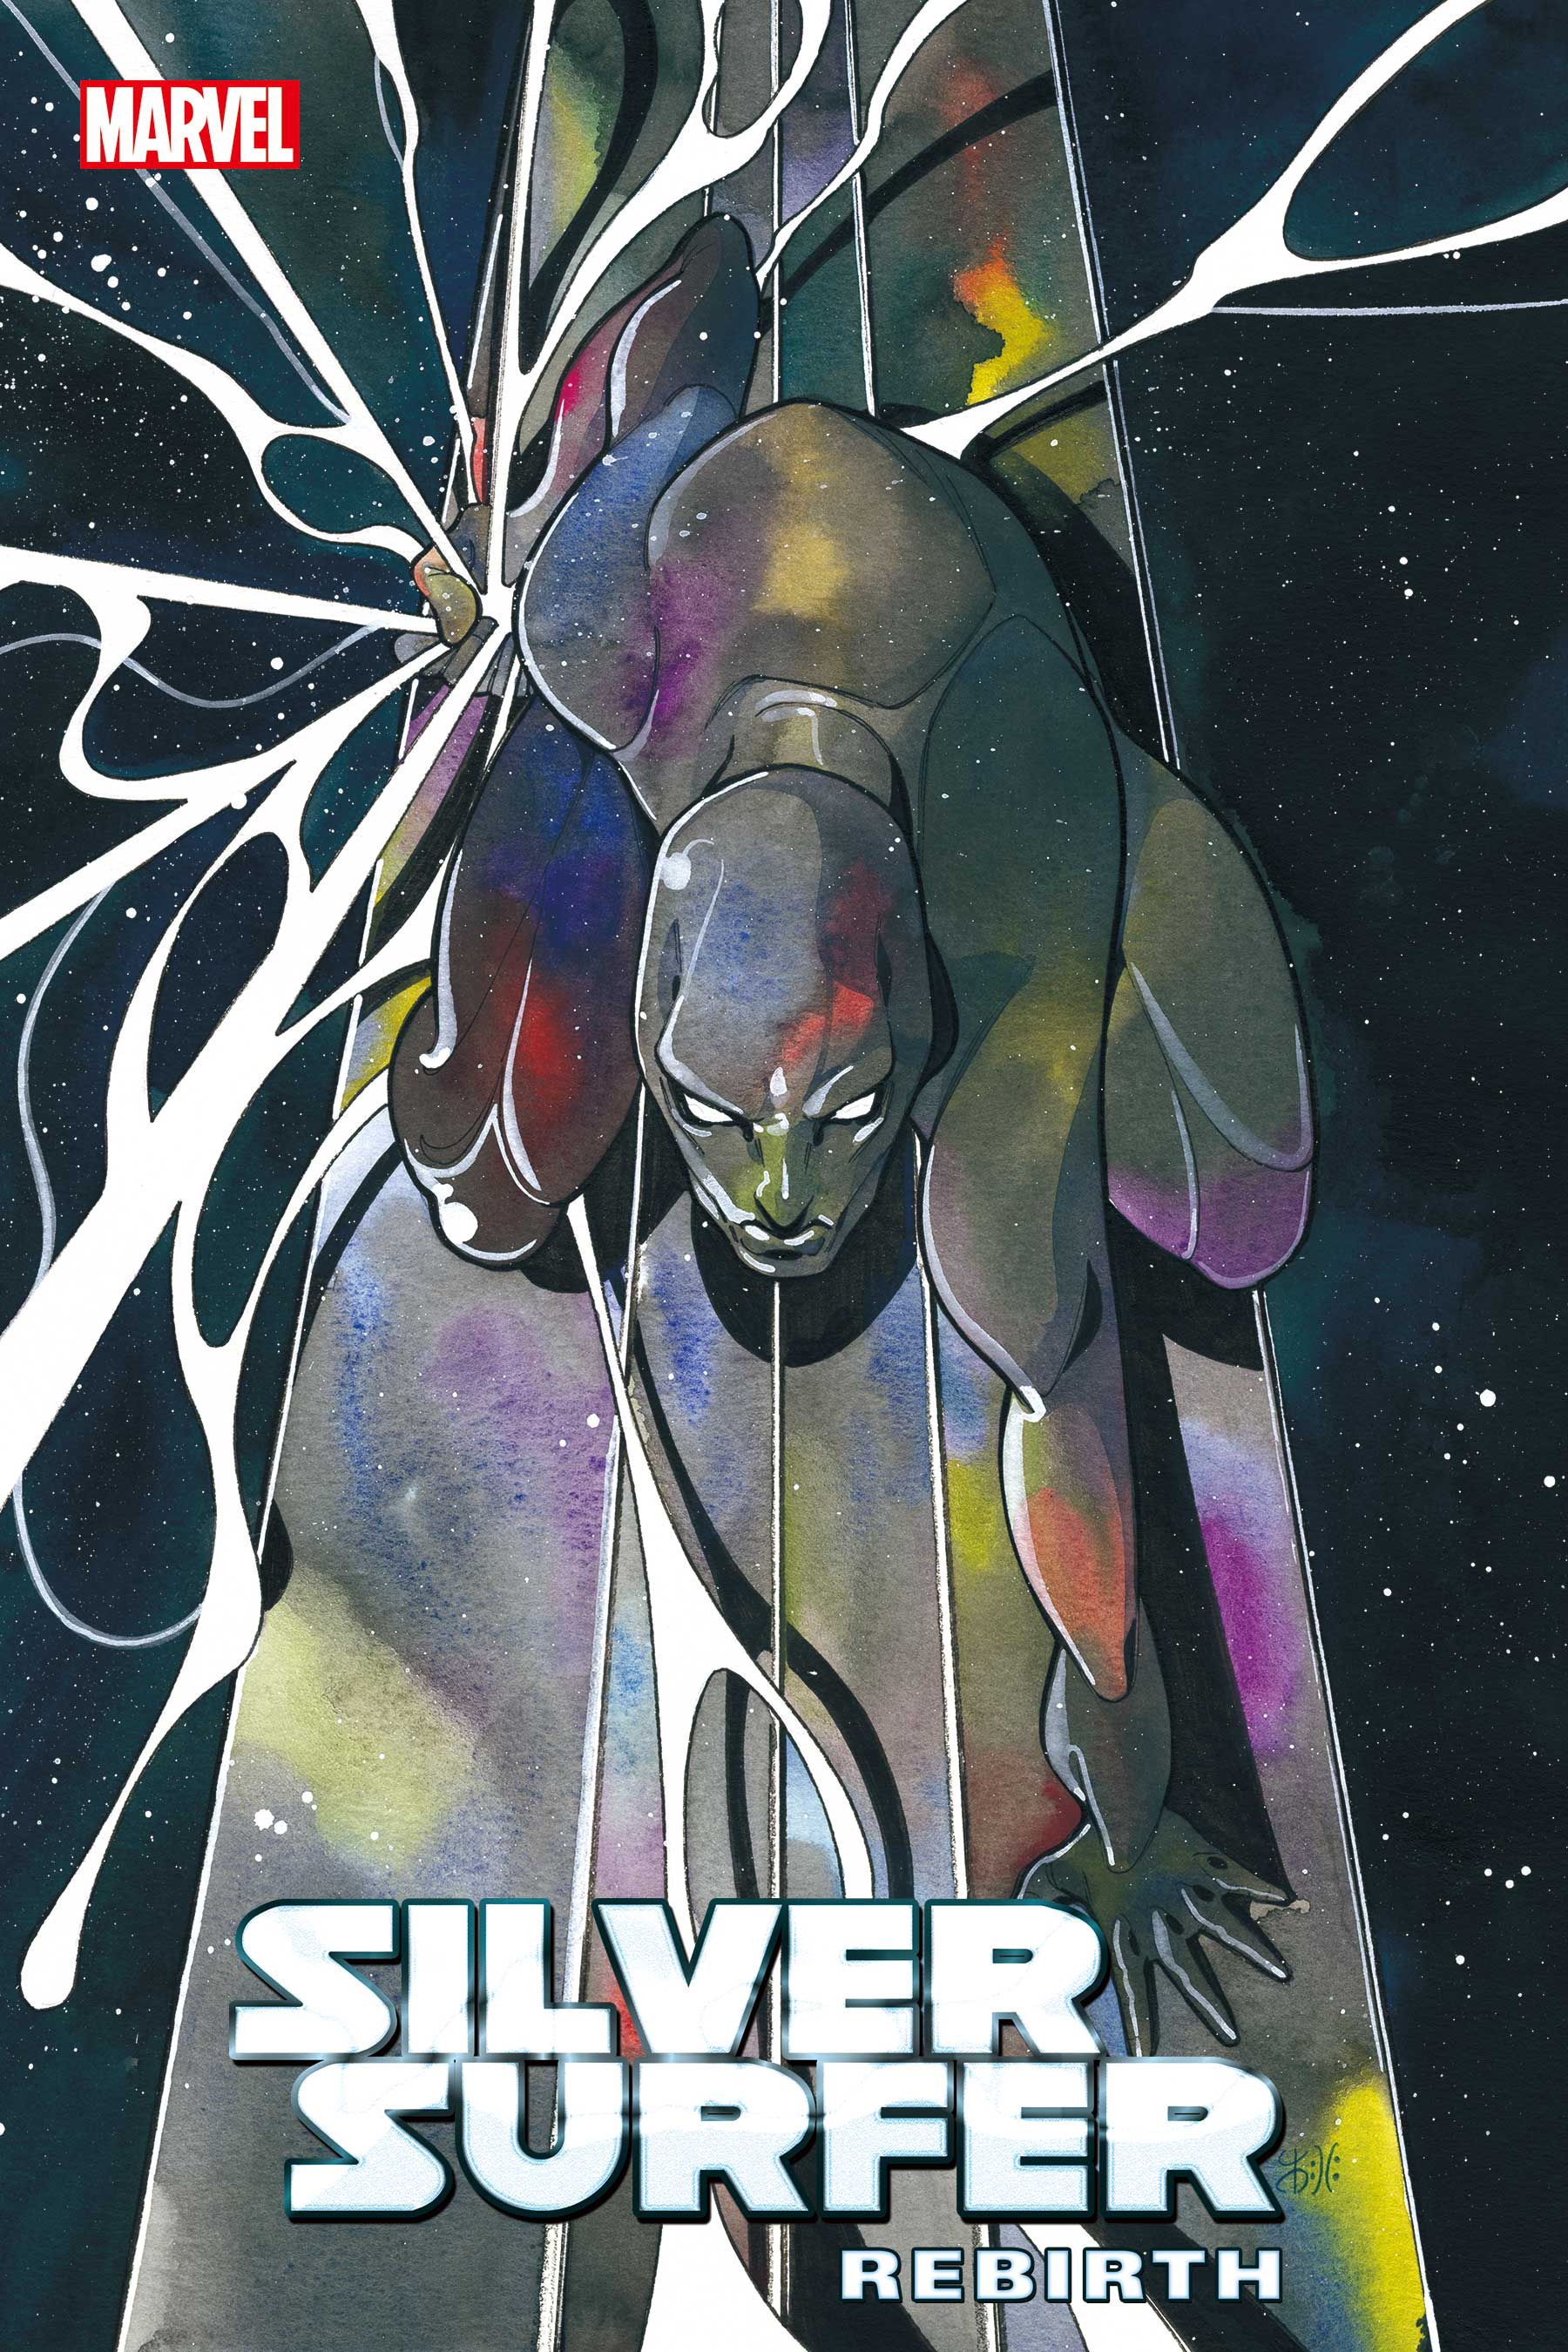 Silver Surfer: Rebirth #1 variant cover